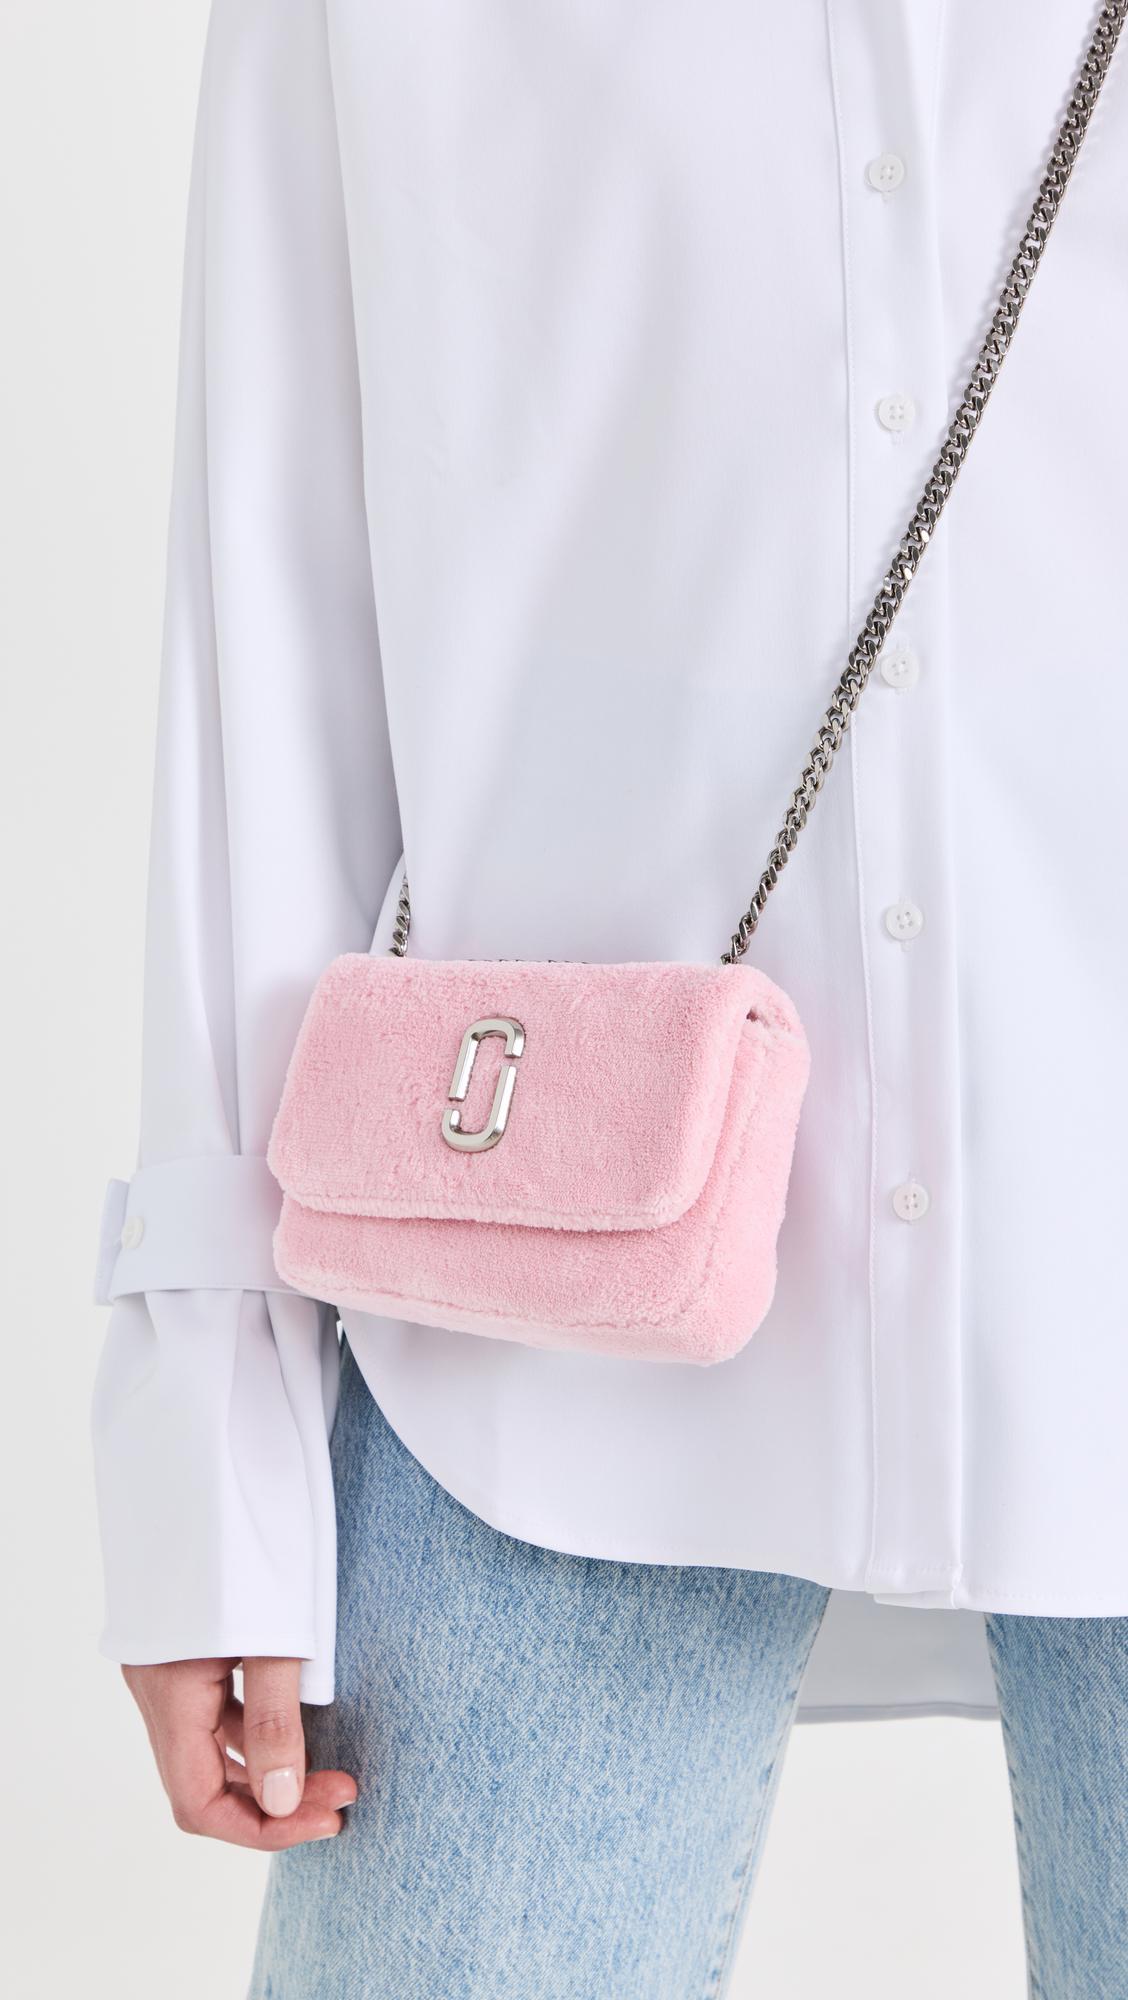 Marc Jacobs The Terry Pouch in Pink